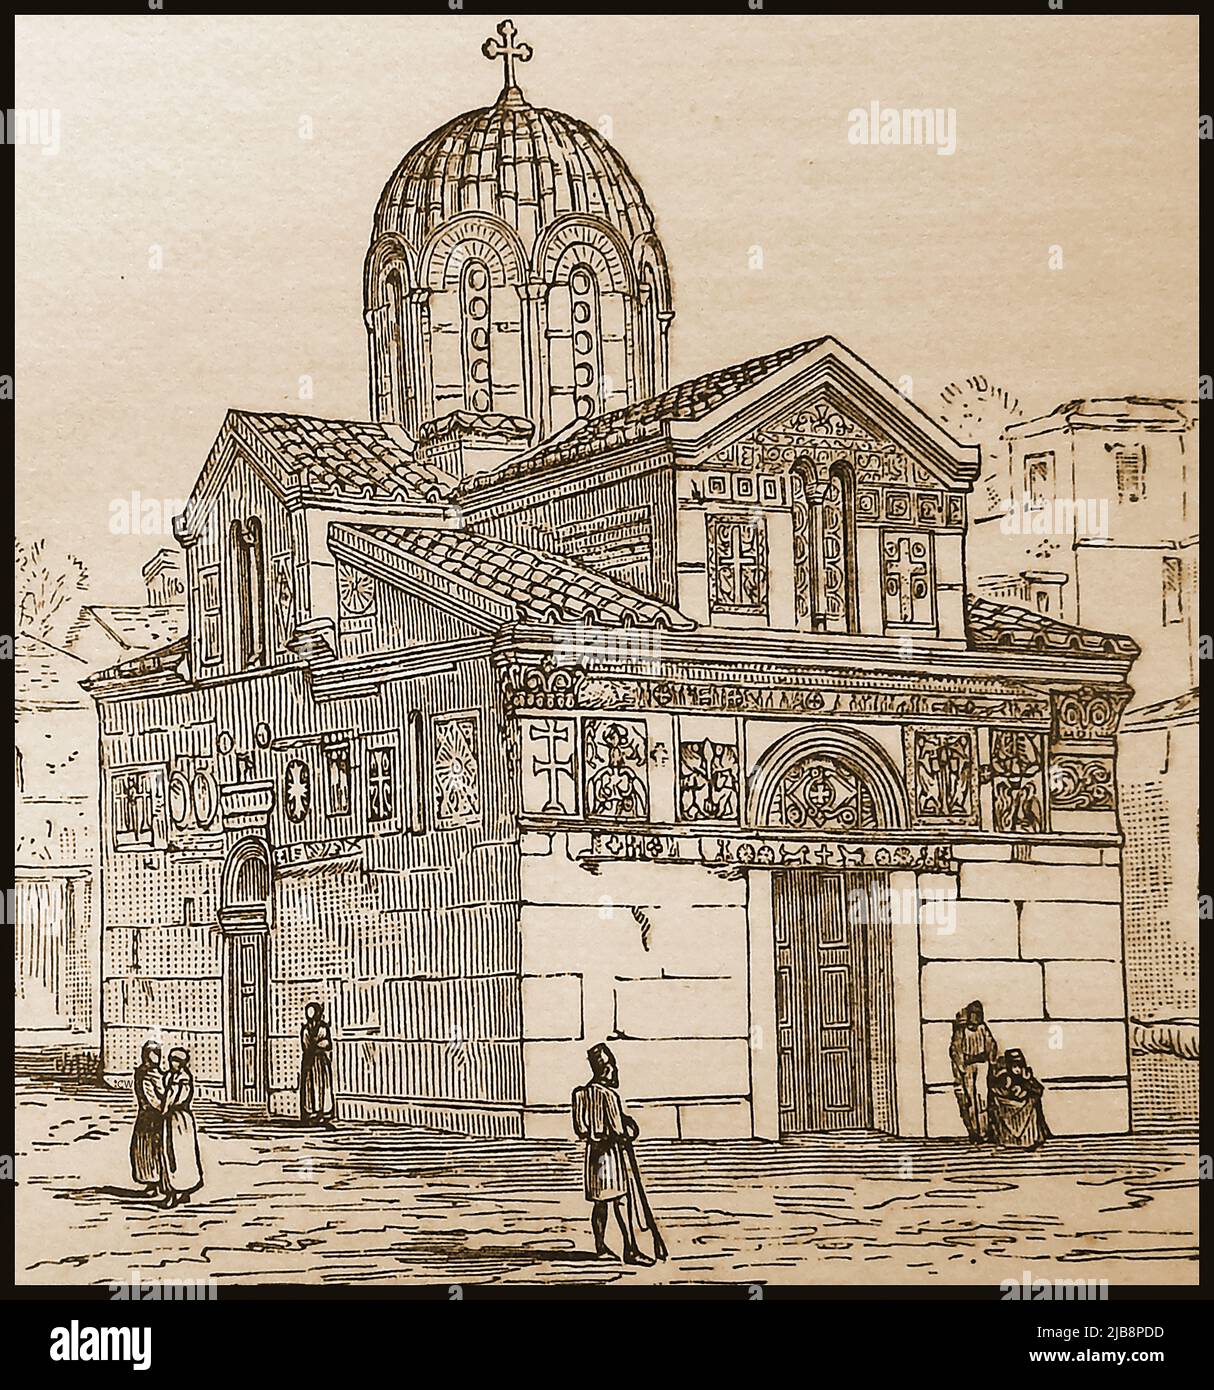 A 19th century engraving of the old Byzantine Cathedral in Athens, Greece  ---Χαρακτική του 19ου αιώνα του παλαιού Βυζαντινού Καθεδρικού Ναού στην Αθήνα Stock Photo